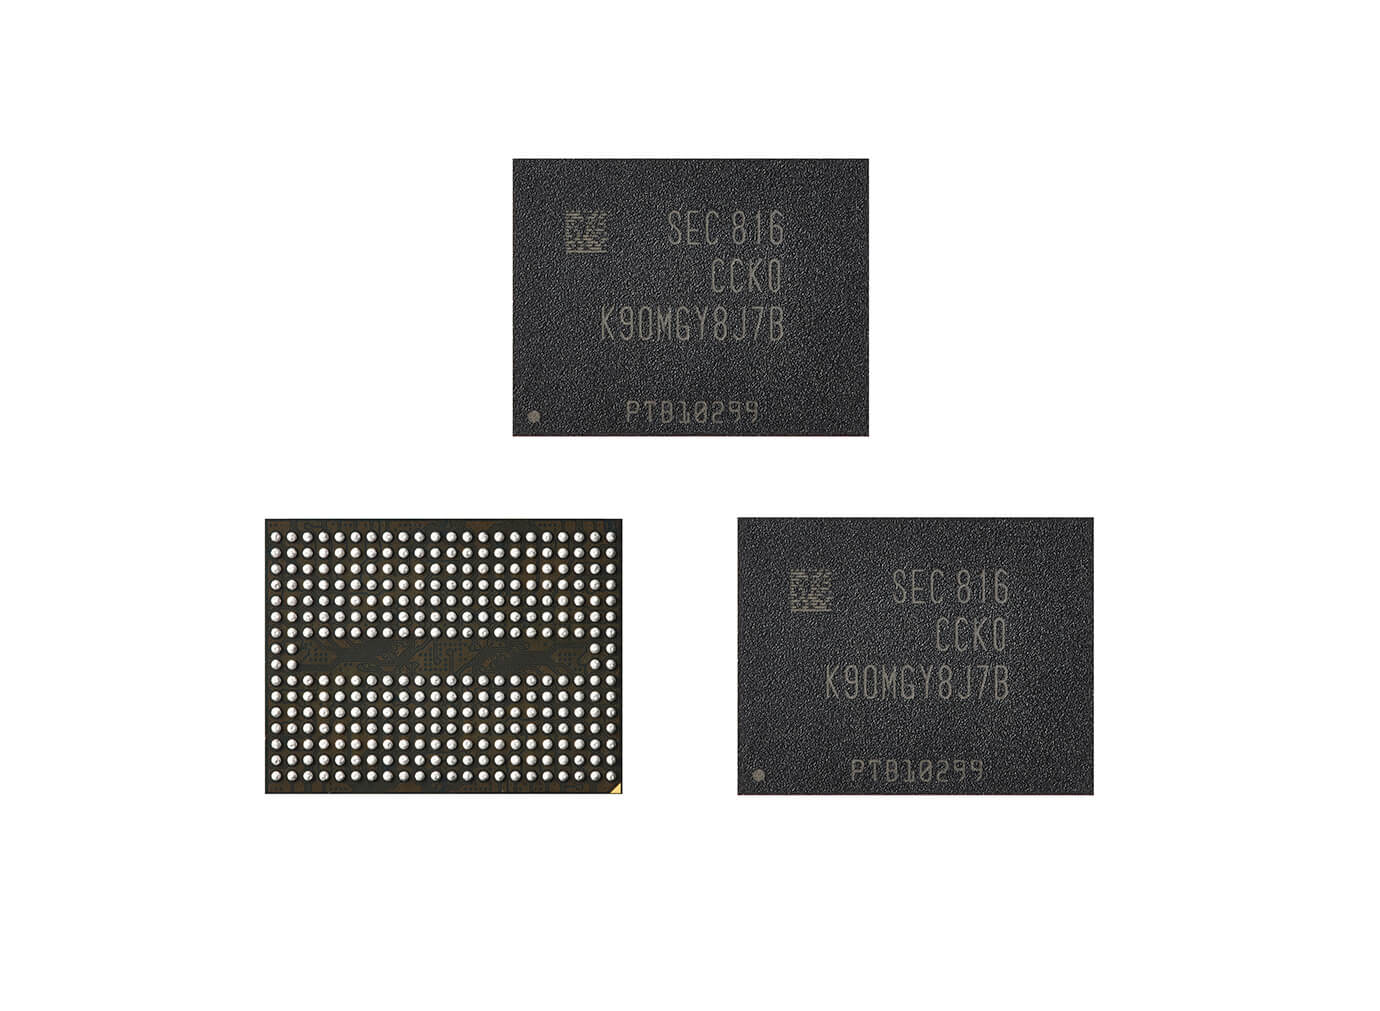 Samsung puts fifth-generation V-NAND memory into mass production